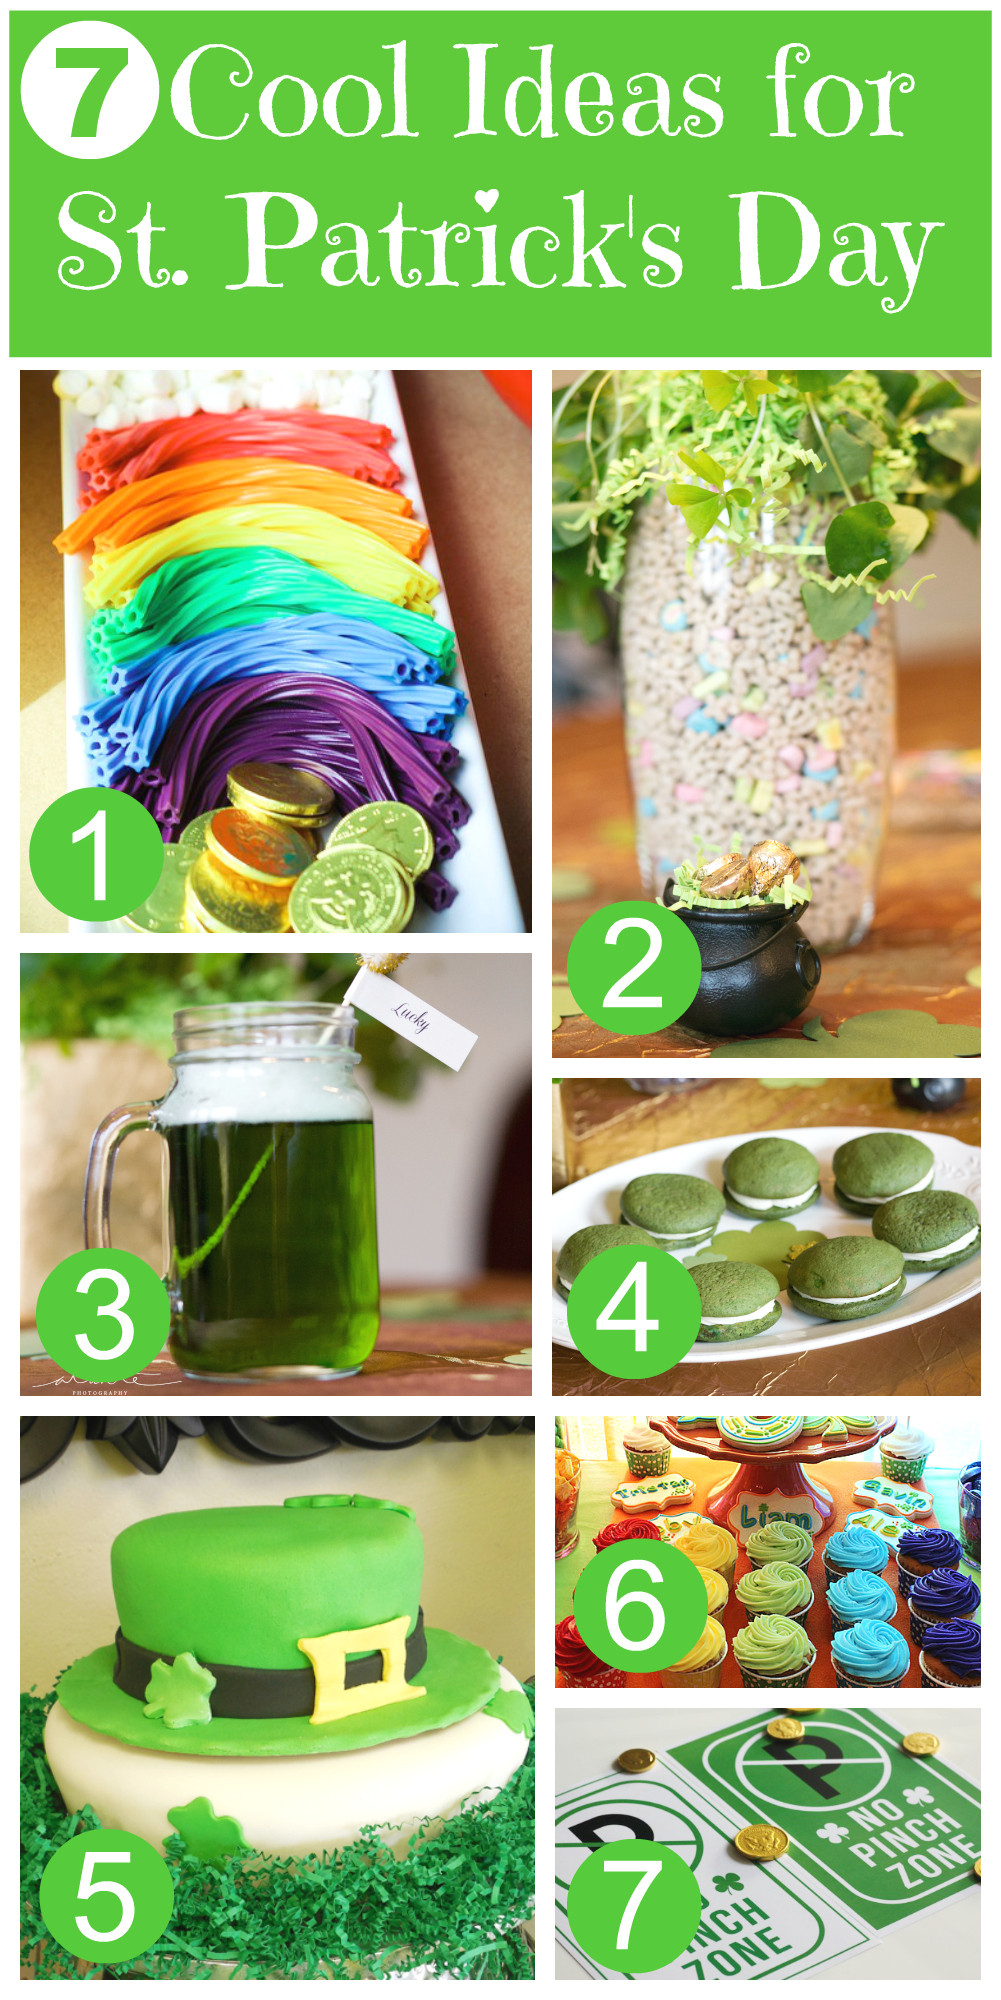 St Patrick's Day Party Ideas
 7 Cool Party Ideas for St Patrick s Day